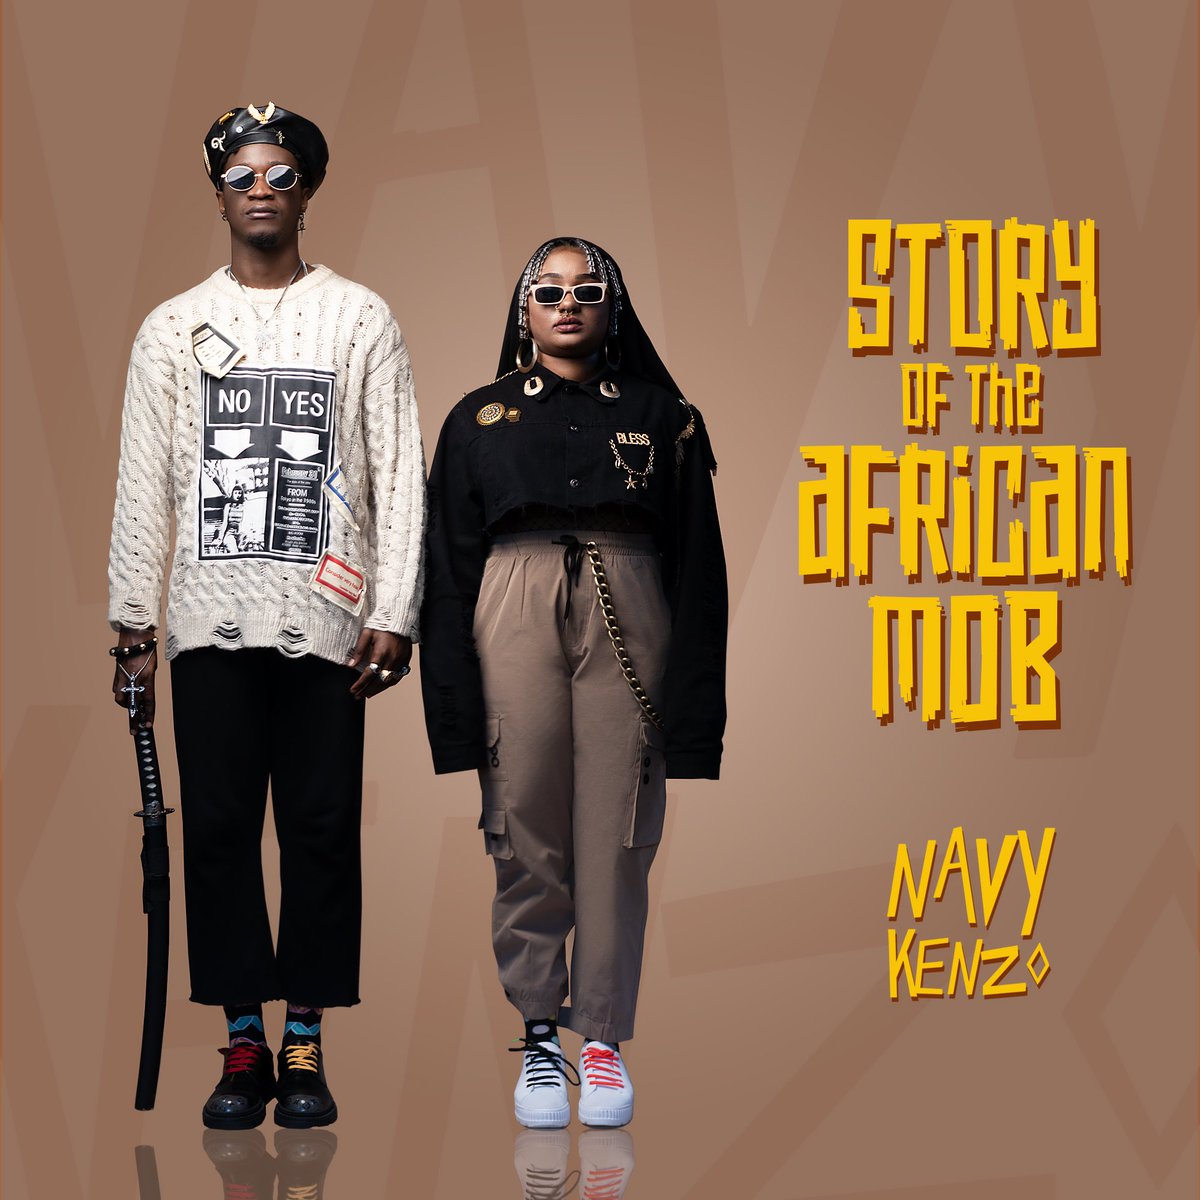 NAVY KENZO Story of The African Mob Album Cover